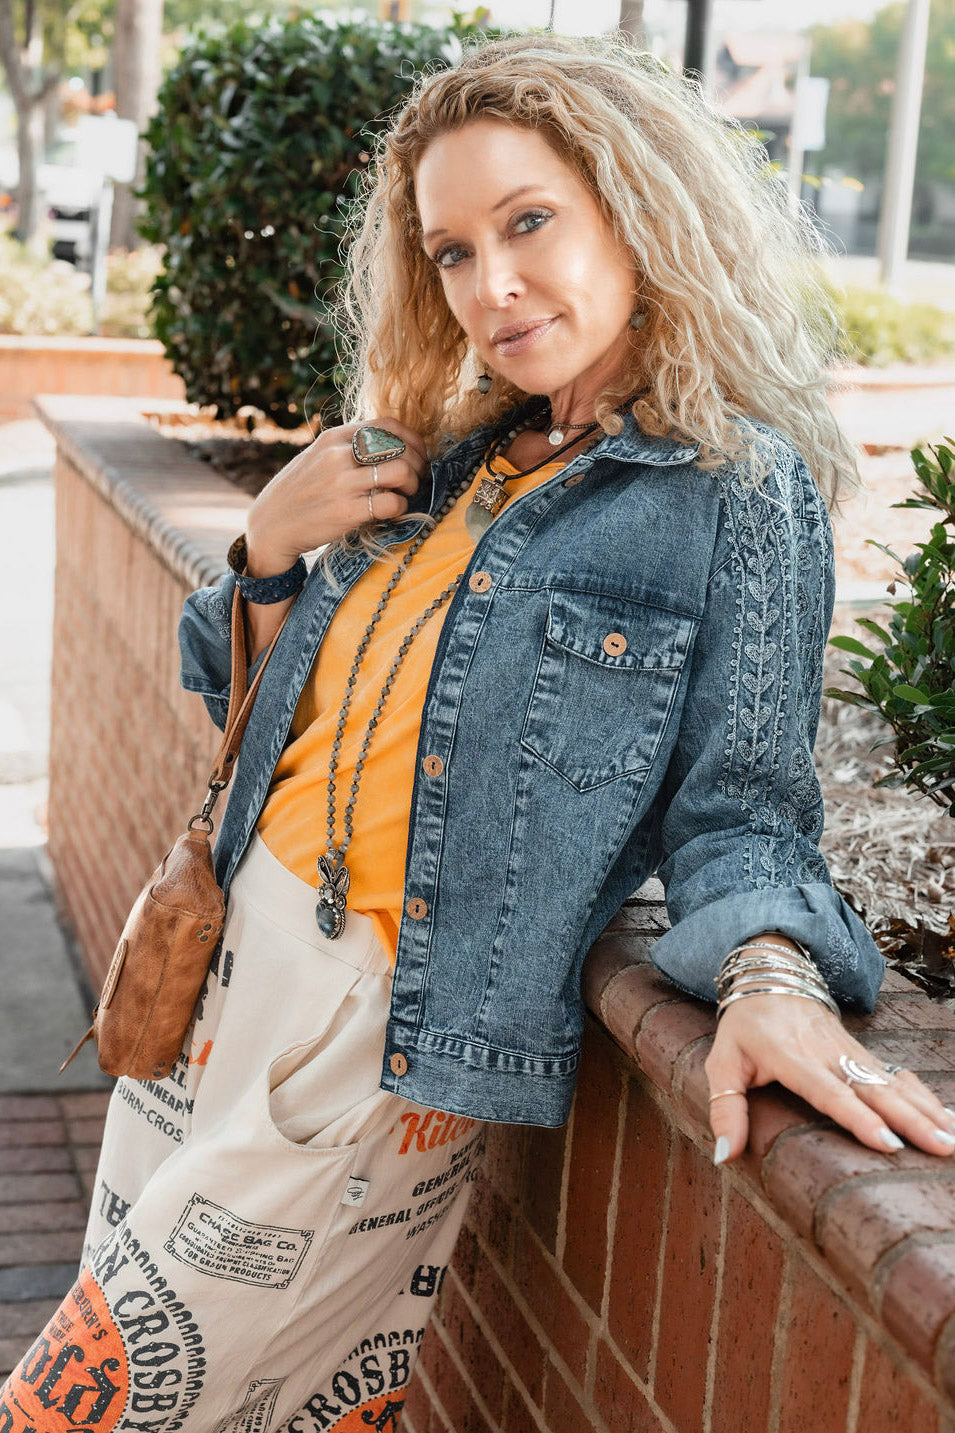 The Clover Denim Jacket in Blue - SpiritedBoutiques Boho Hippie Boutique Style Jacket, Young Threads